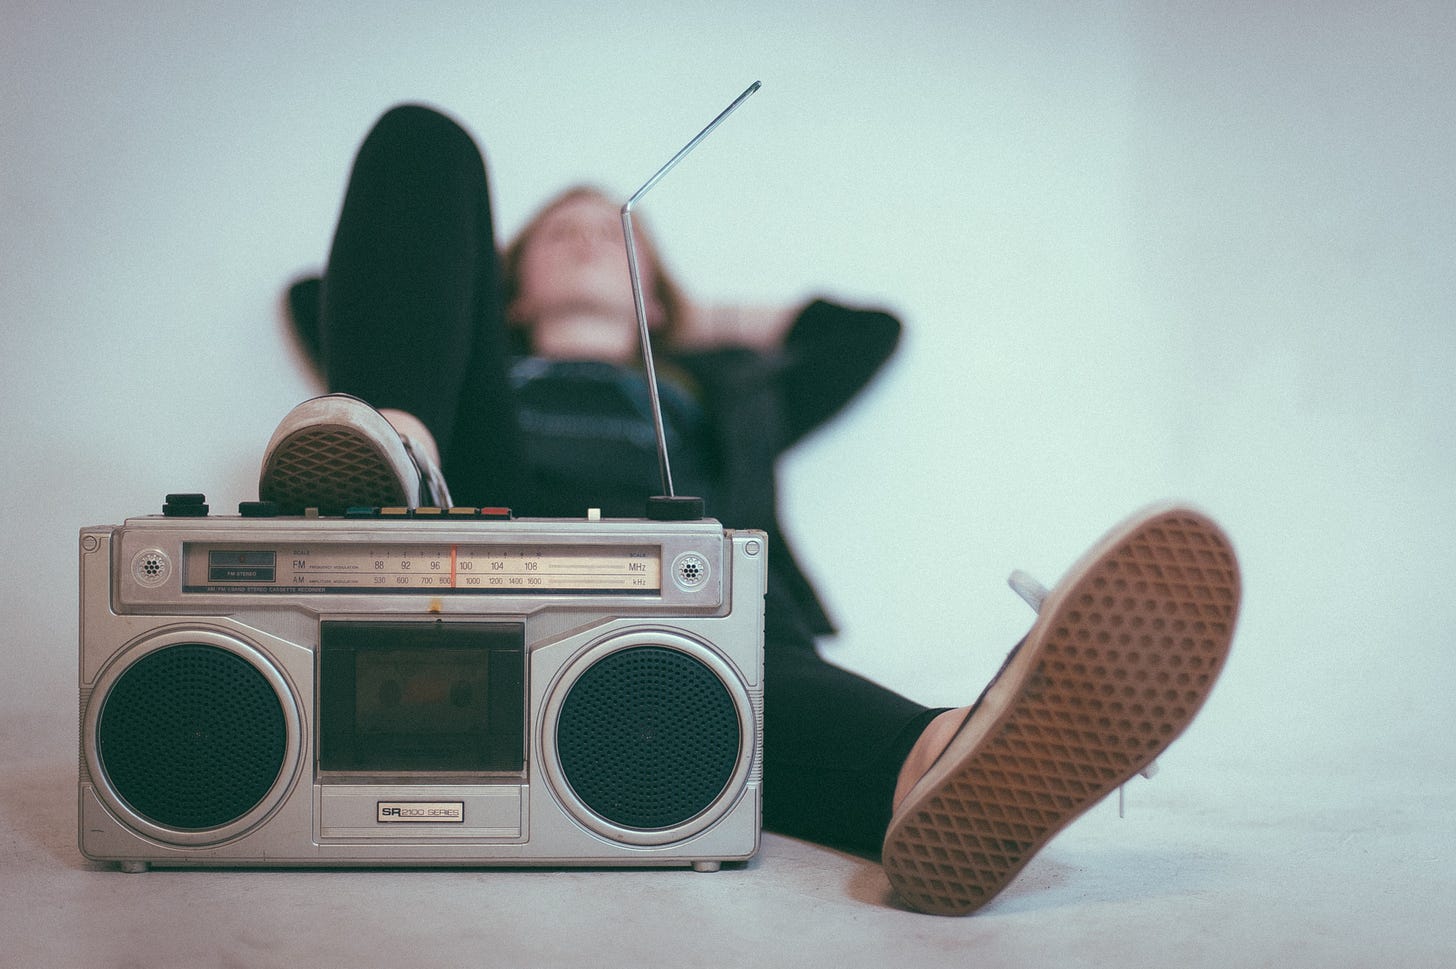 Man laying down with his sneaker up on a boom box. Background is plain white.